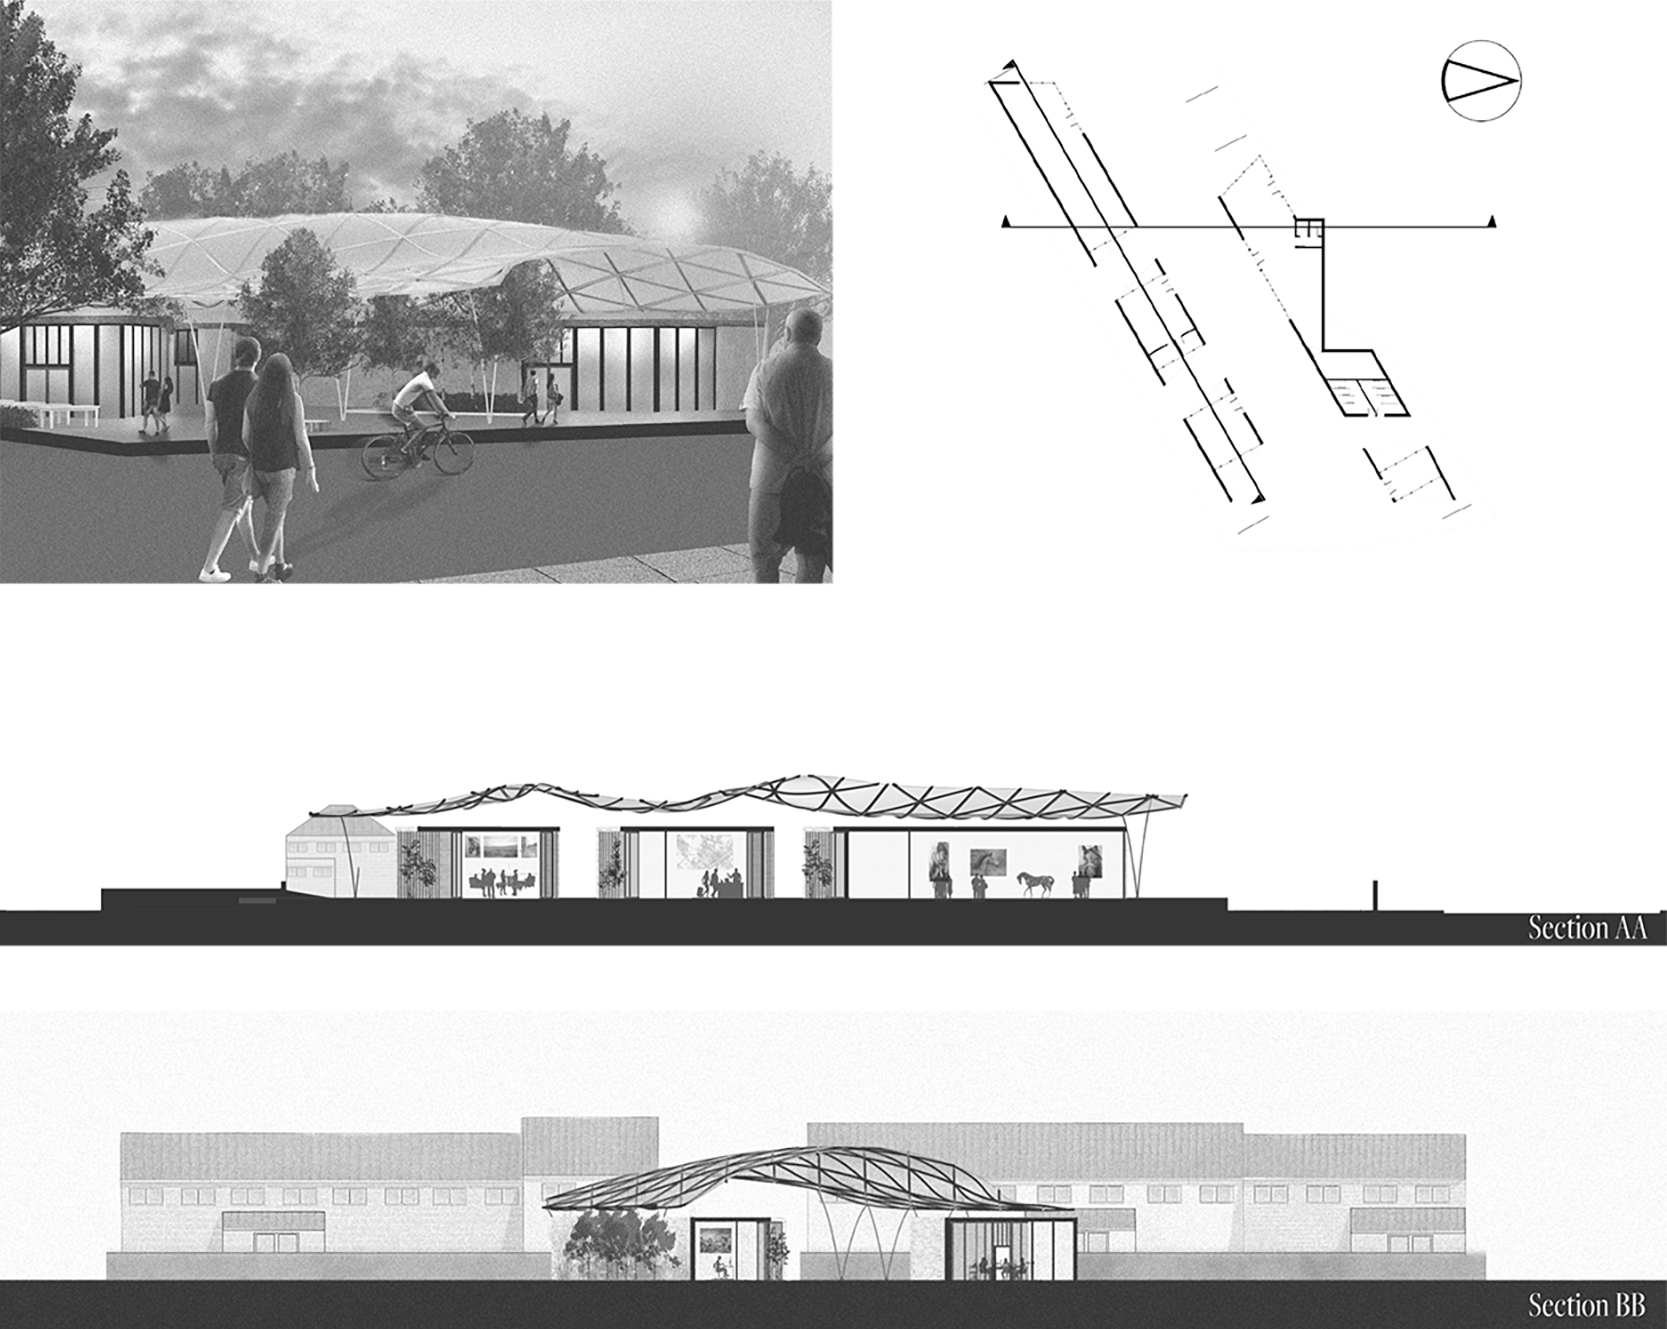 Row 1 from left to right: Architecture render showing the external view of the building at sunset with people walking in the street, Key plan showing section cut lines. Row 2: Architecture section showing people walking within the building. Row 3: Architecture section showing people walking within the building.